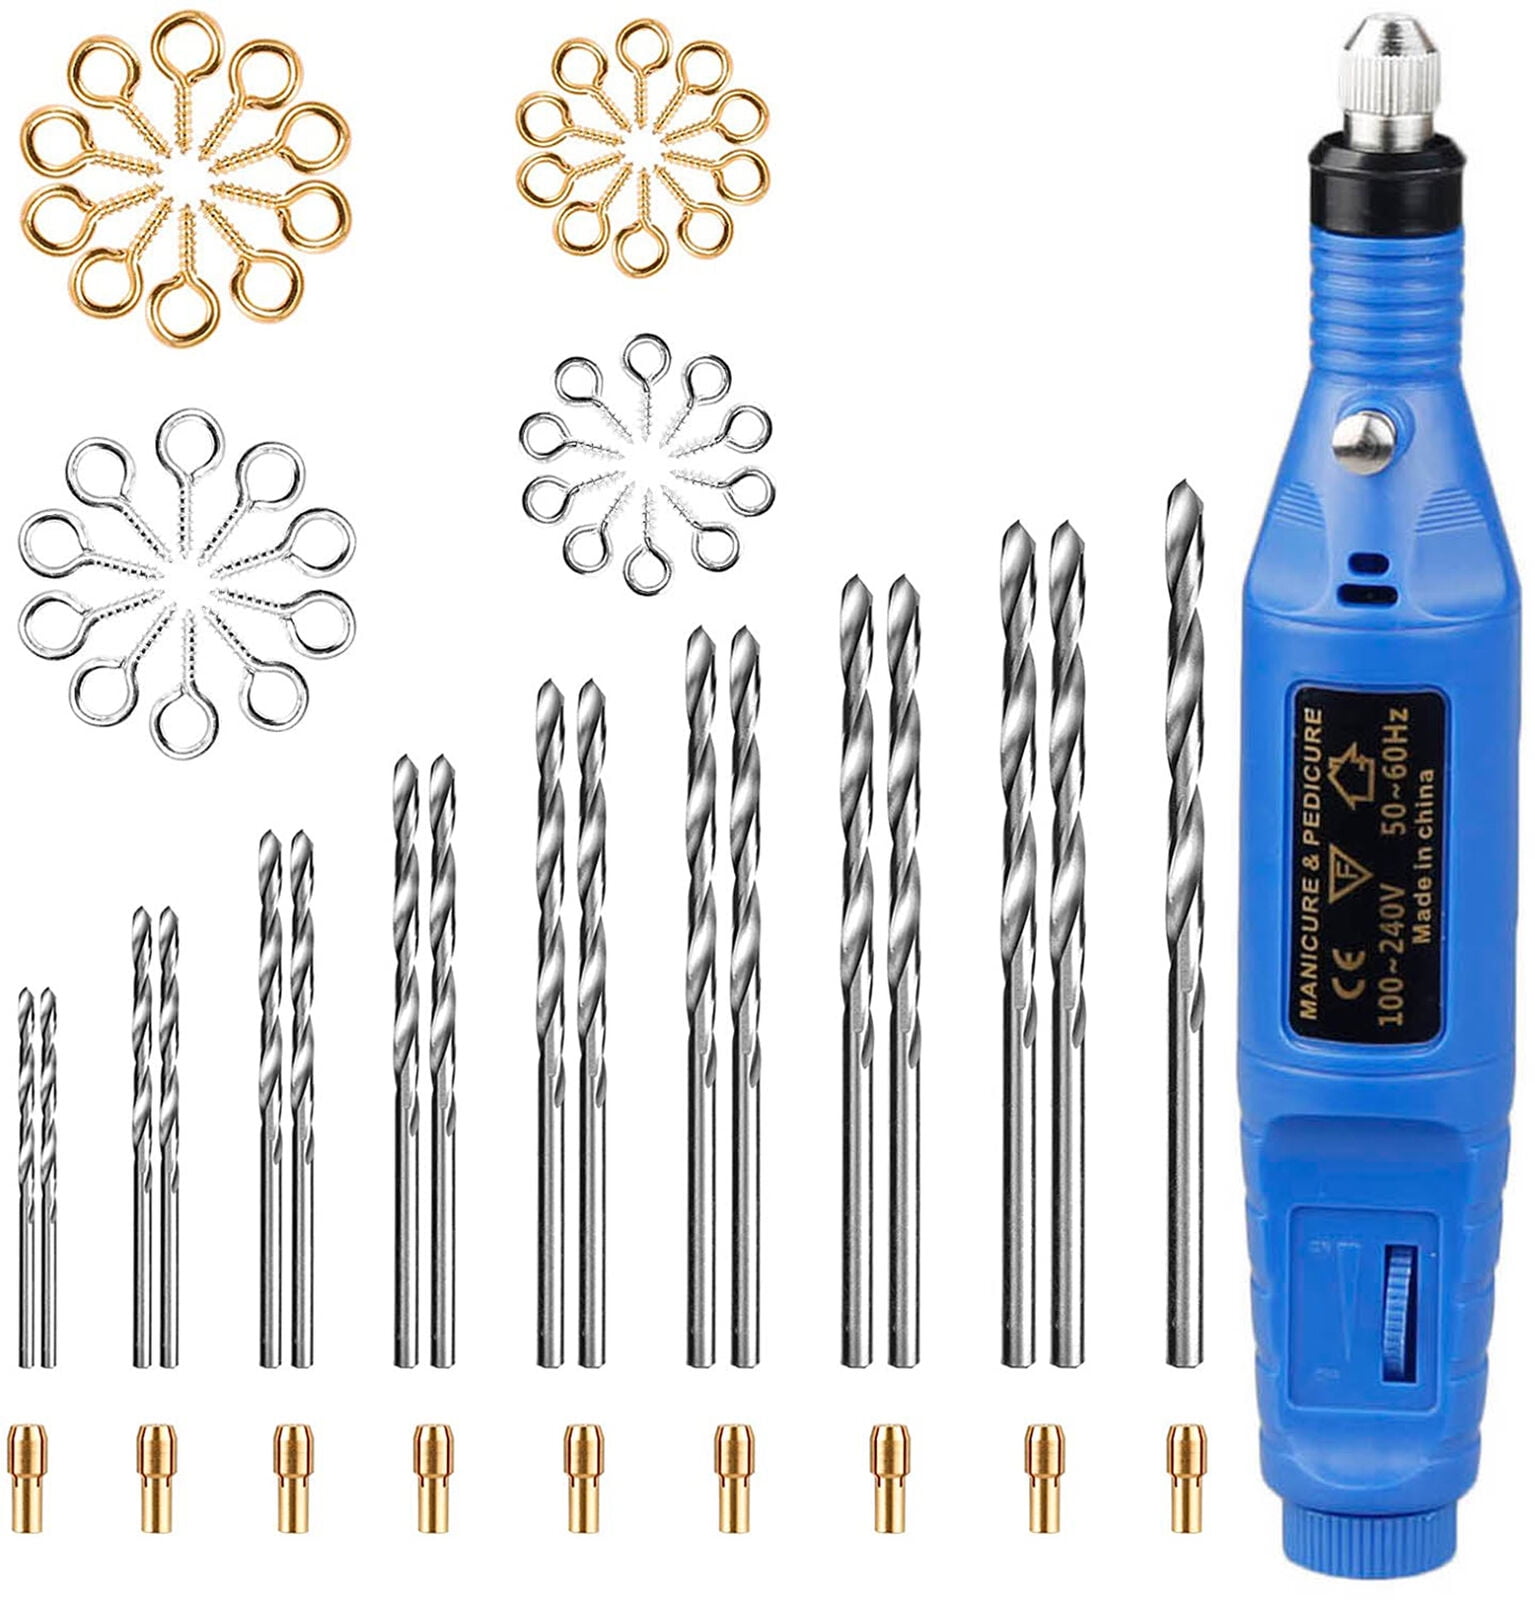  Mini Hand Drill for Arts and Crafts,Mini Electric Drill Set  0.7-1.2 mm Pin Vise Hand Drill with Drill Bits and Wrench DIY Jewelry  Pendant Crafts Making : Tools & Home Improvement